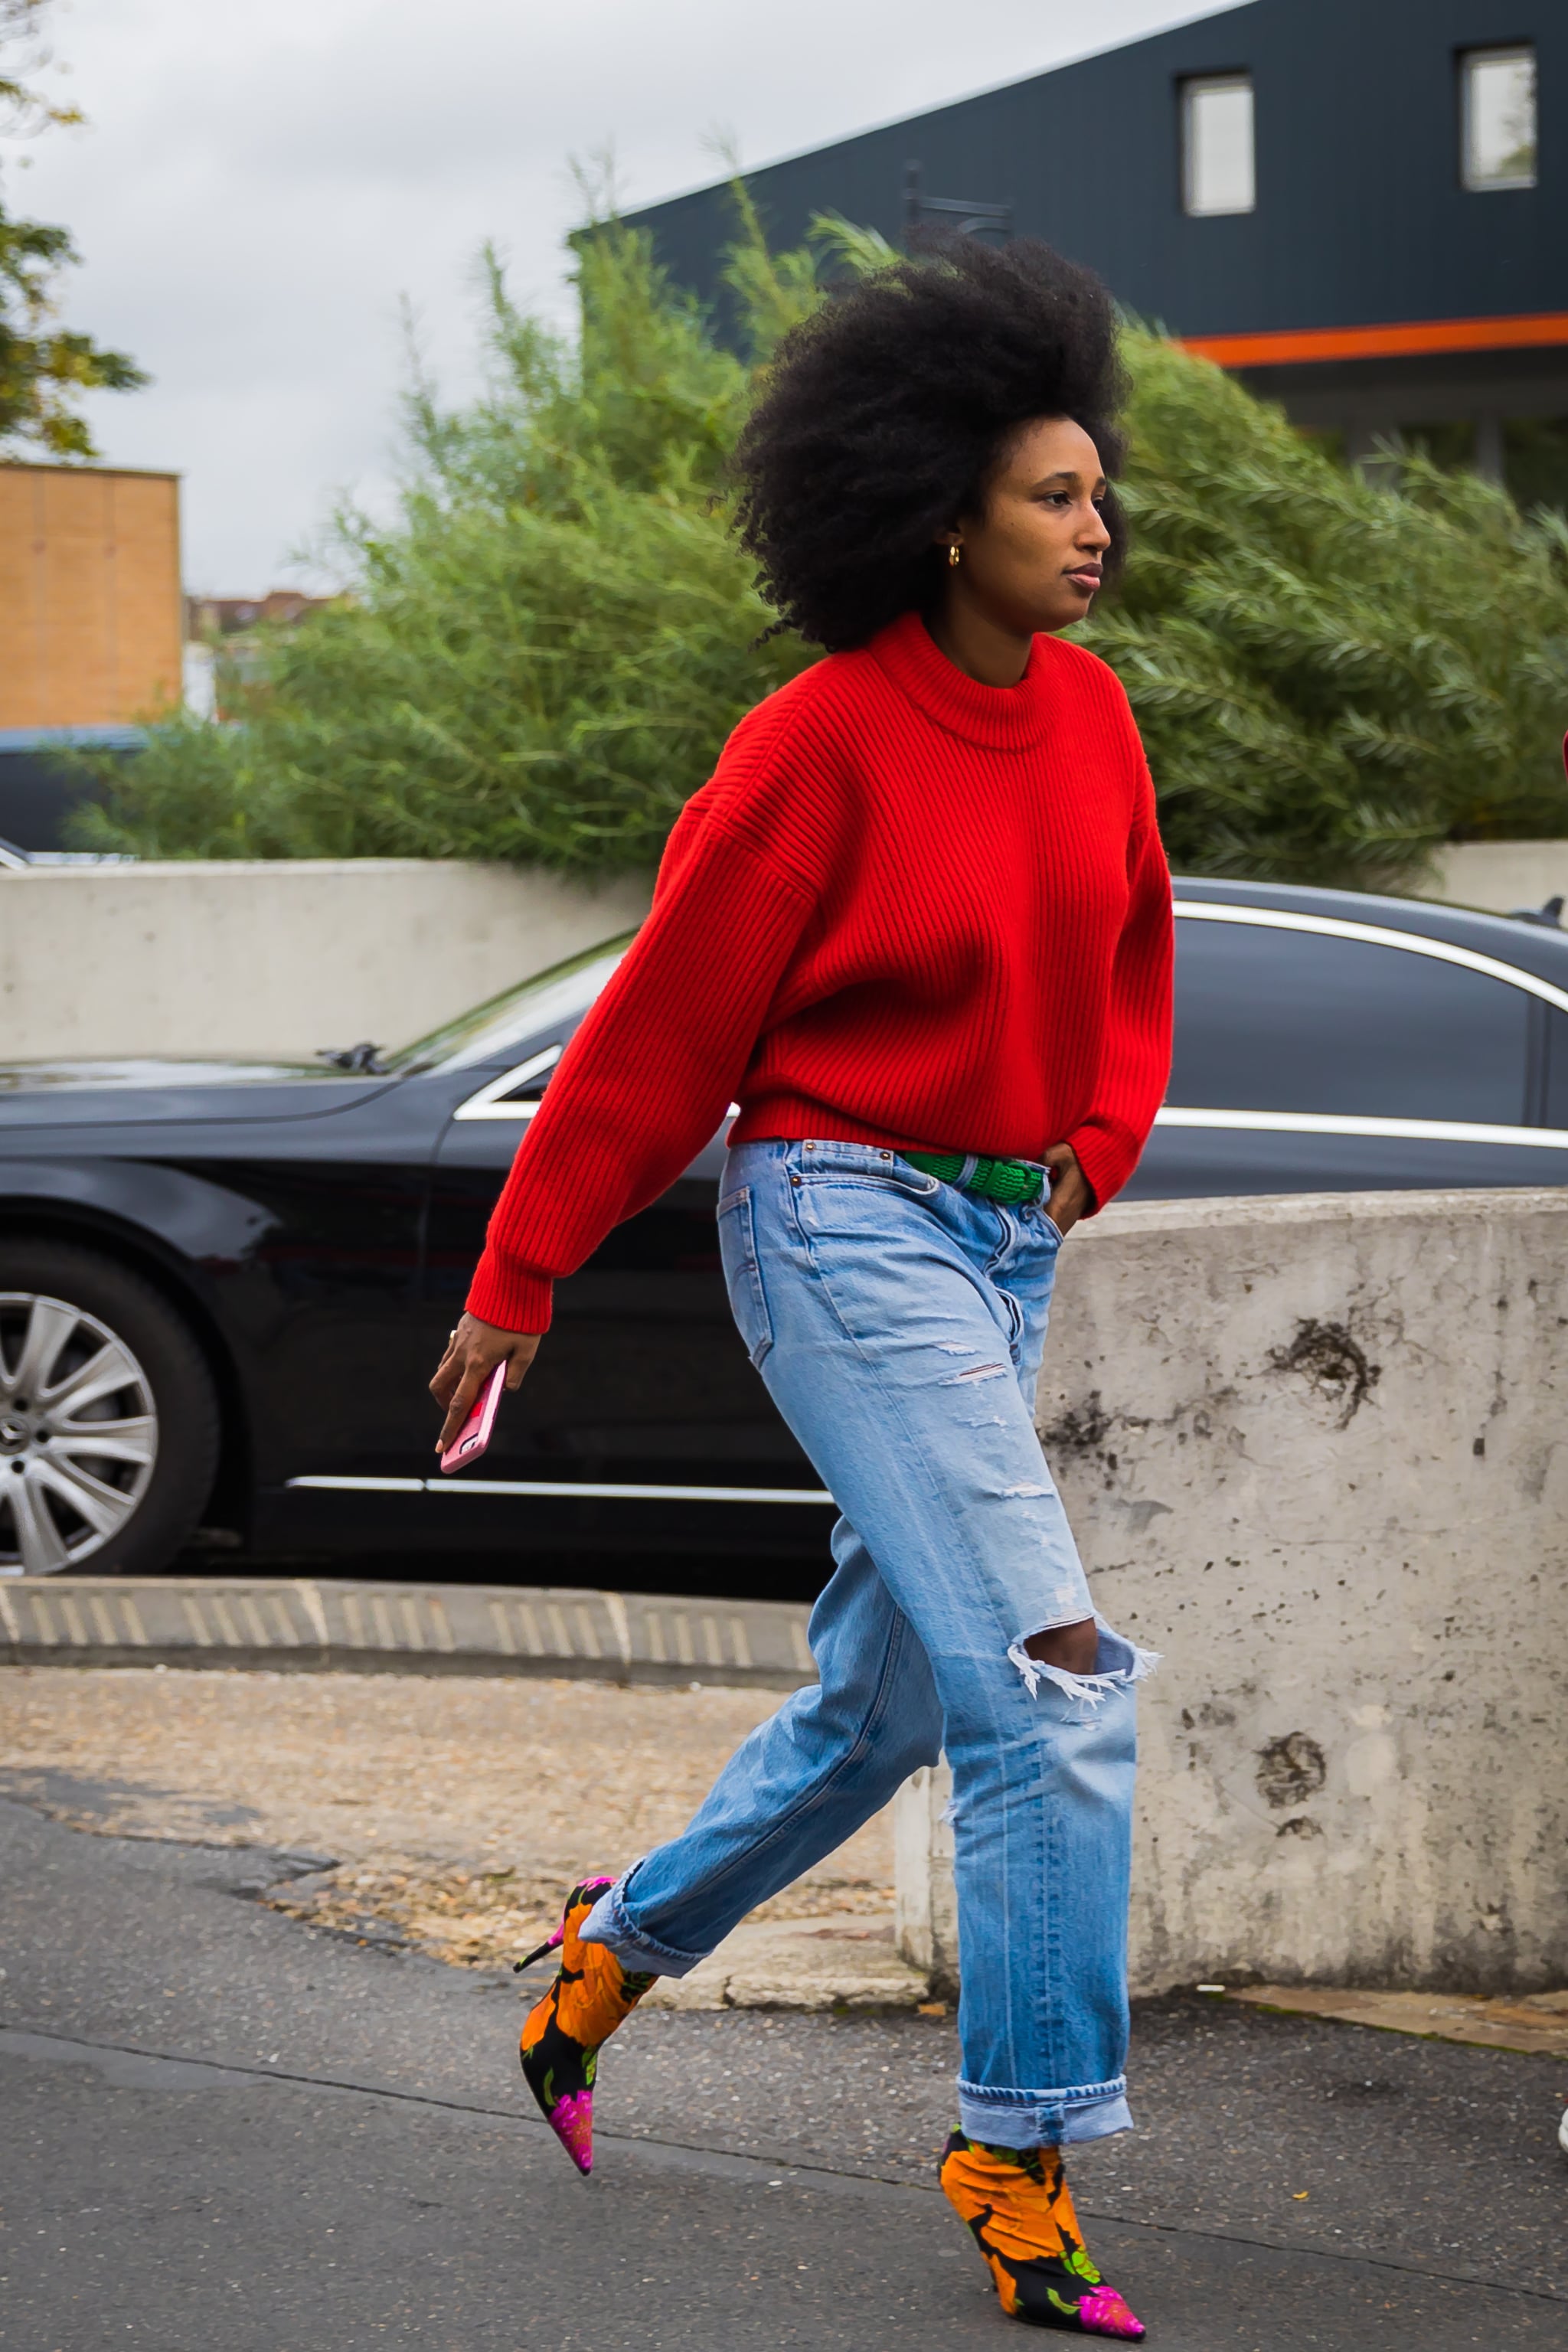 Moedig Collectief venijn Cozy Up in a Red Sweater and Boyfriend Jeans | How to Look Fashionable  While Staying Warm | POPSUGAR Fashion Photo 15